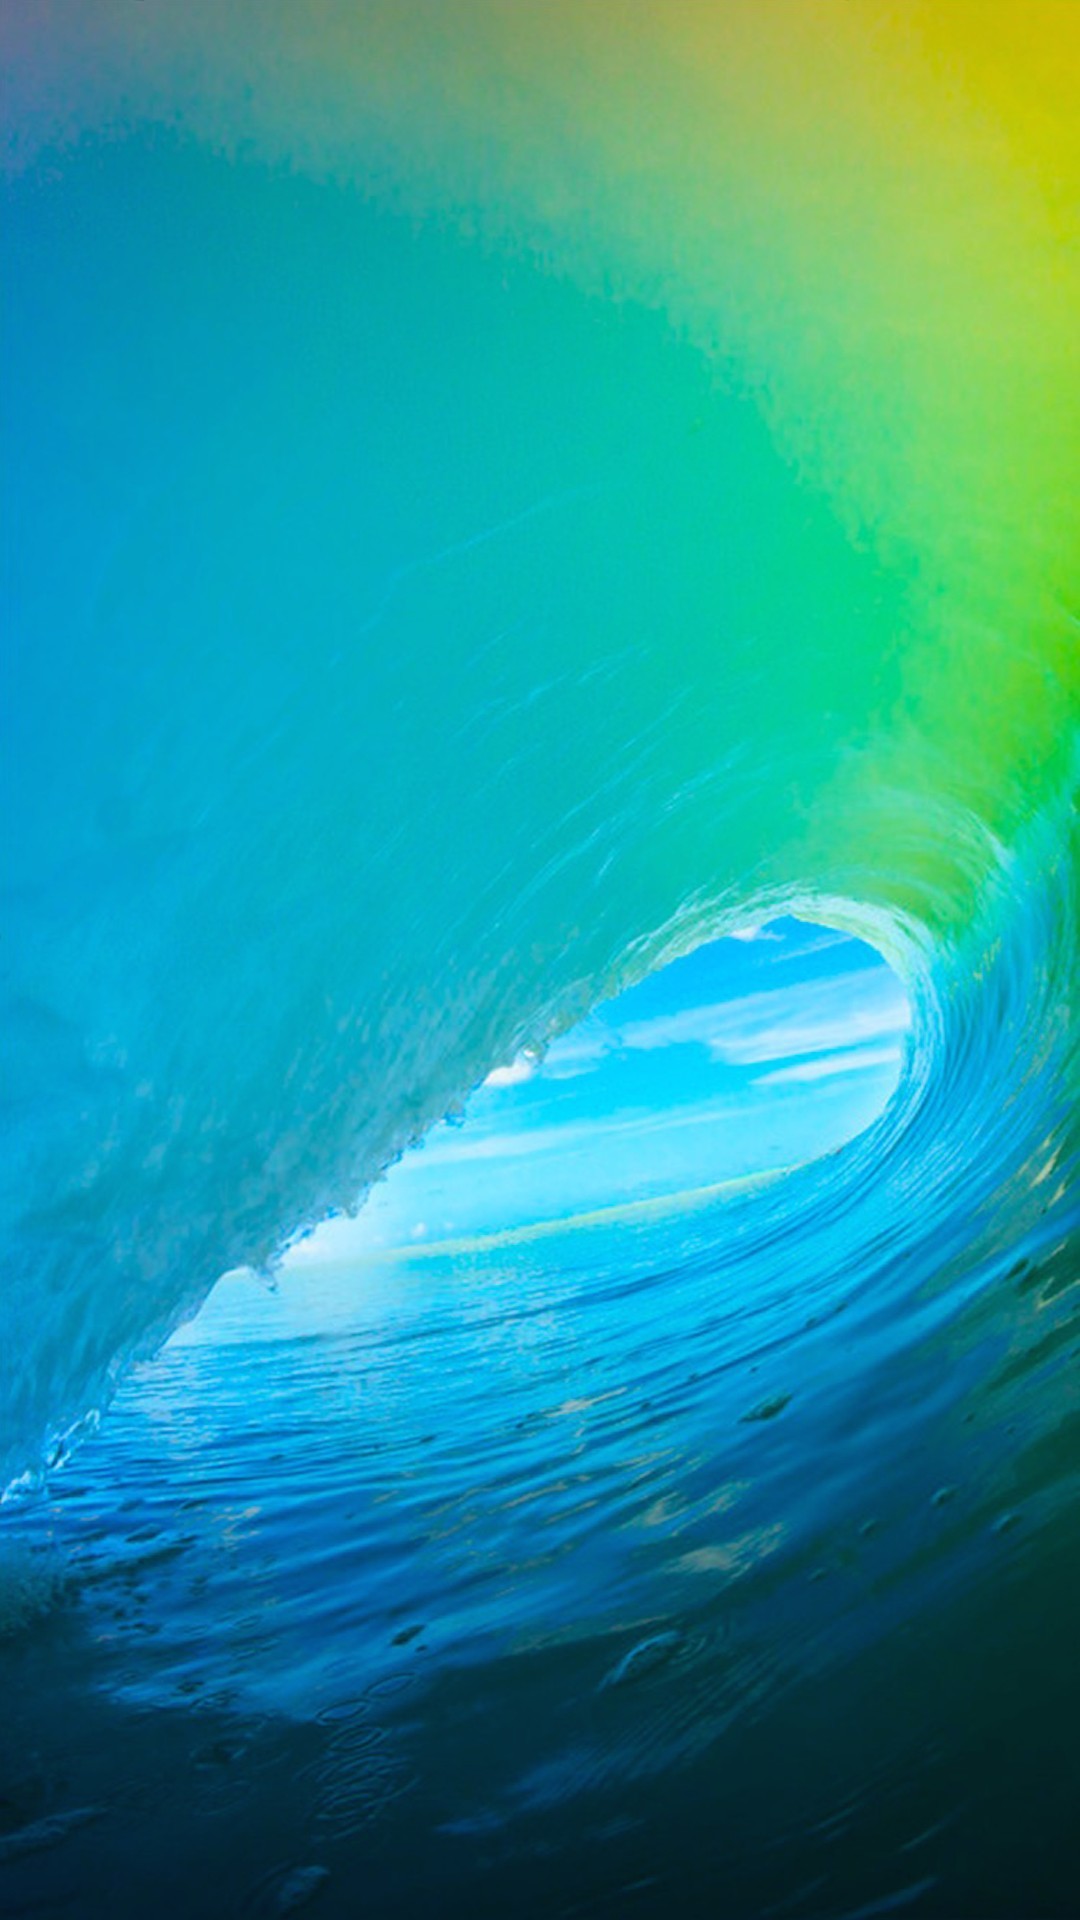 Explore Iphone 6 Wallpaper, Phone Wallpapers, and more